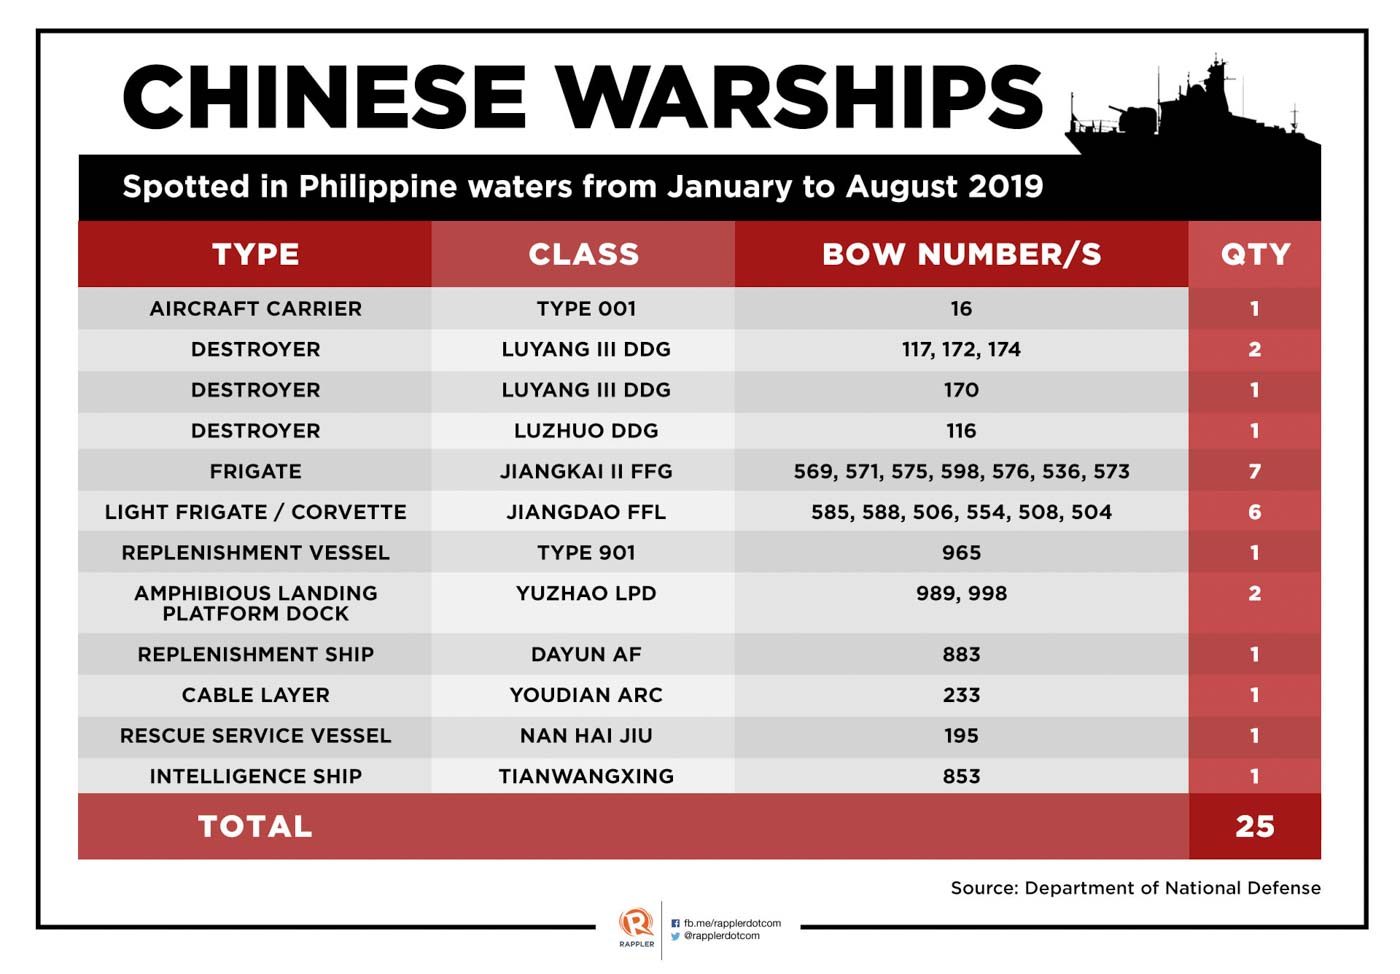 2019: Year of rough seas for PH in the face of belligerent China